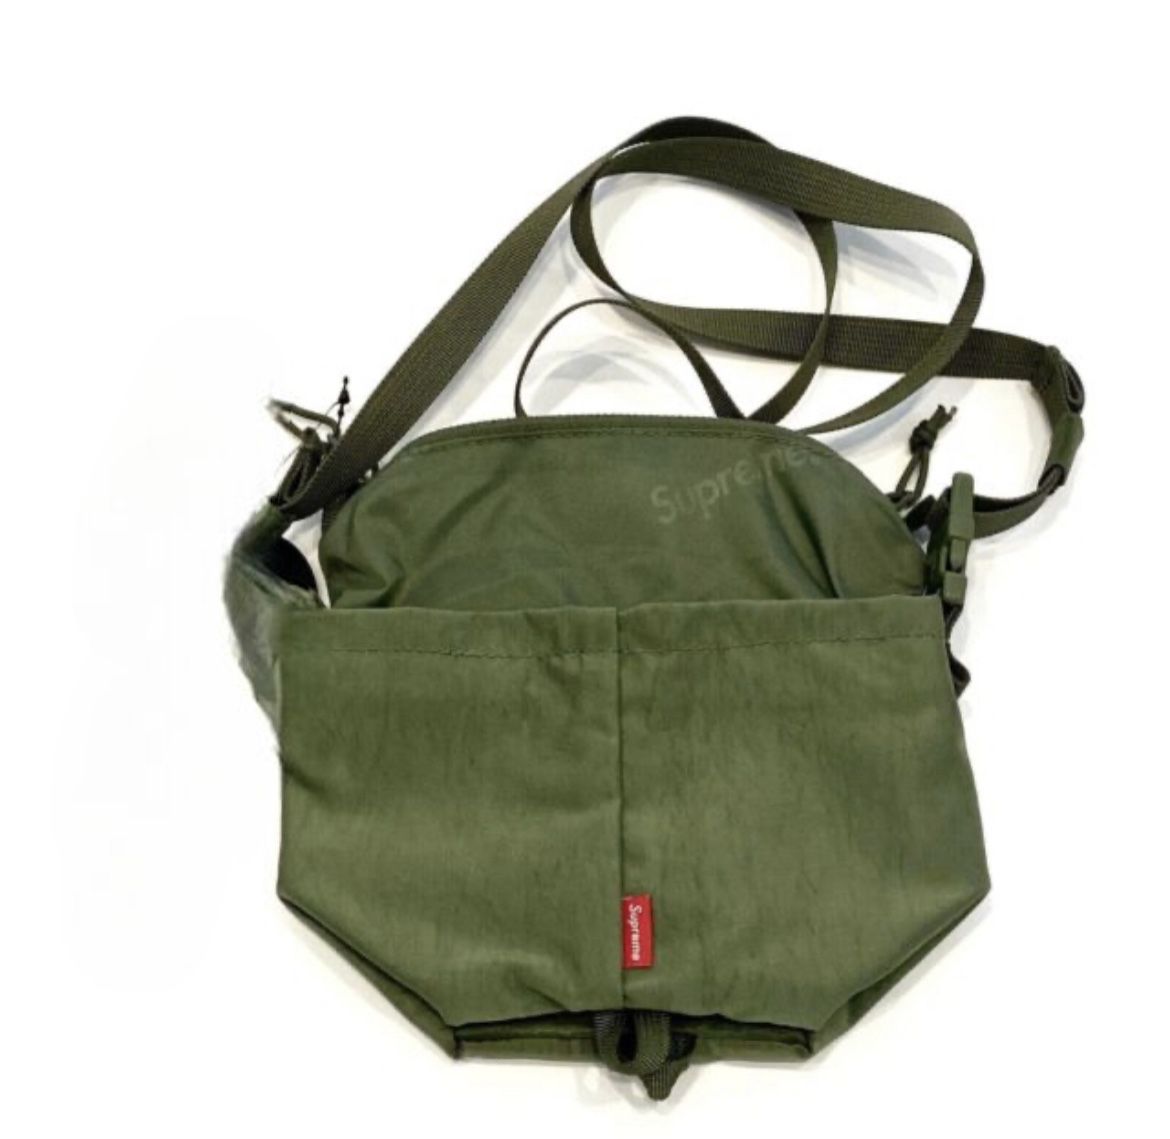 Supreme shoulder and Neck Pouch Bags Green 